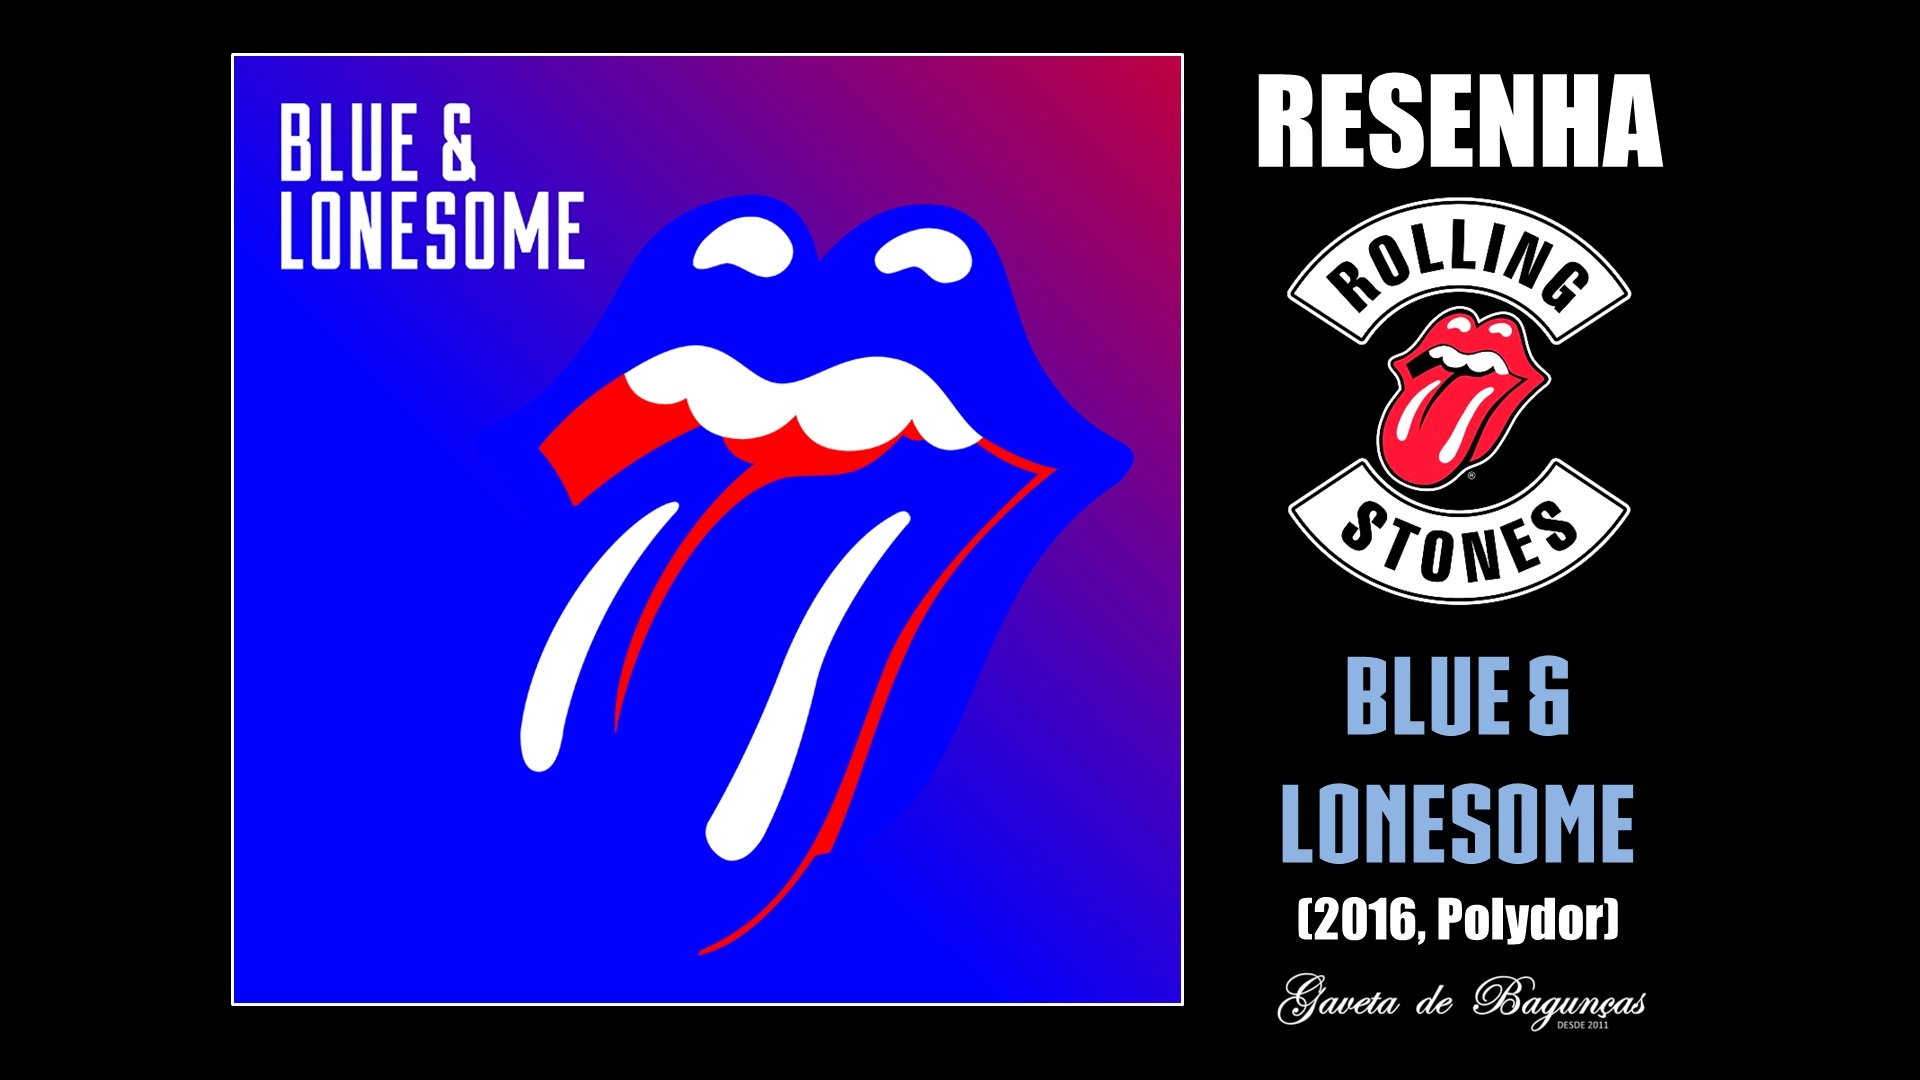 Rolling Stones - Blue & Lonesome (2016, Polydor, Universal Music Brasil)